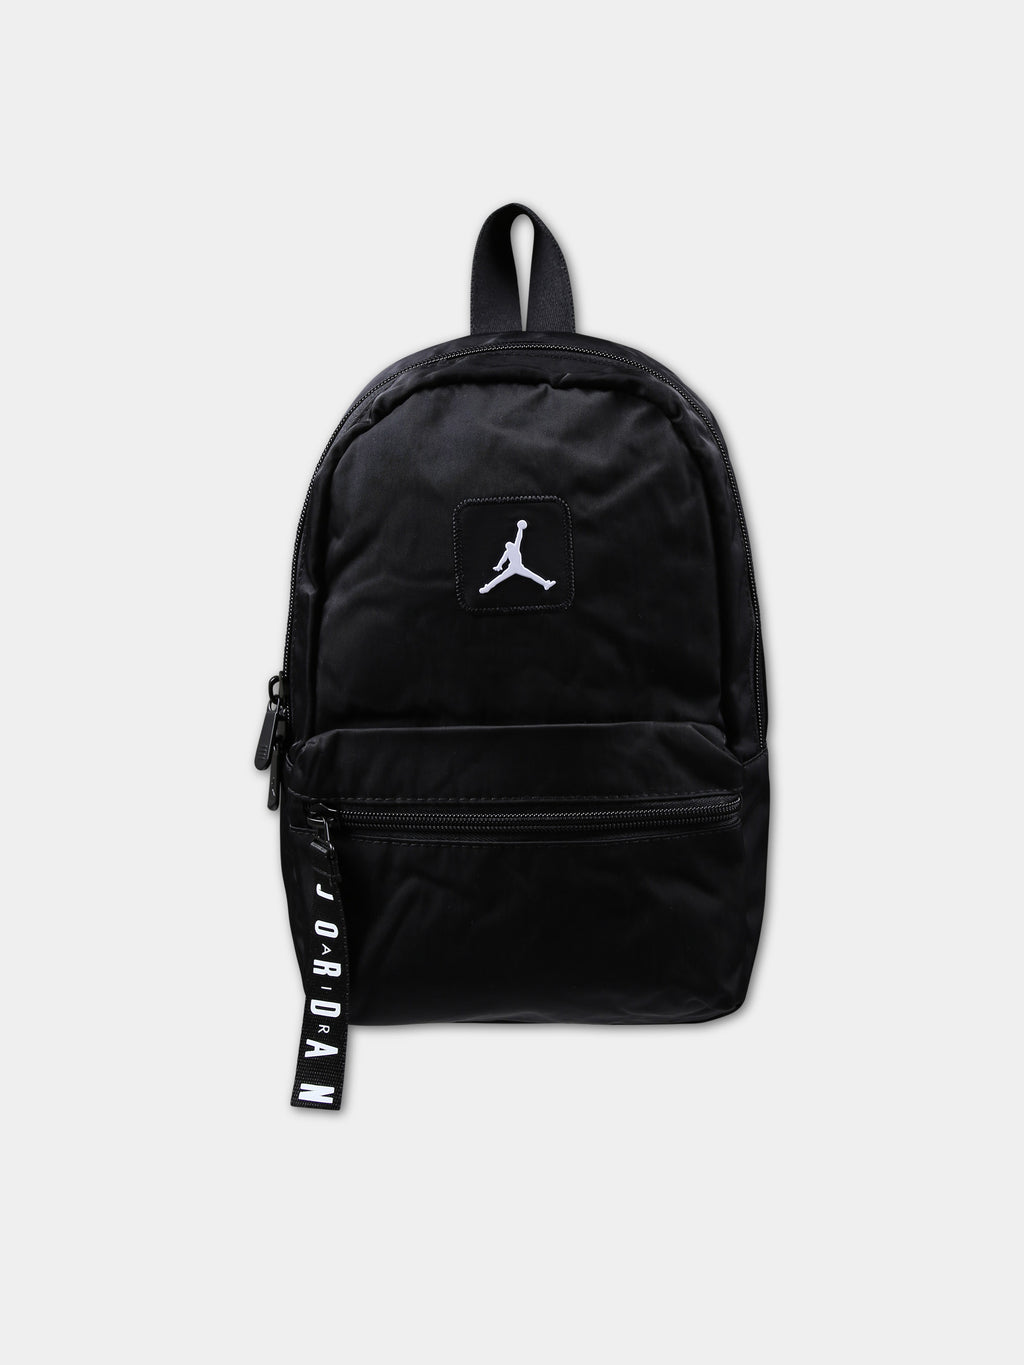 Black backpack for boy with iconic Jumpman